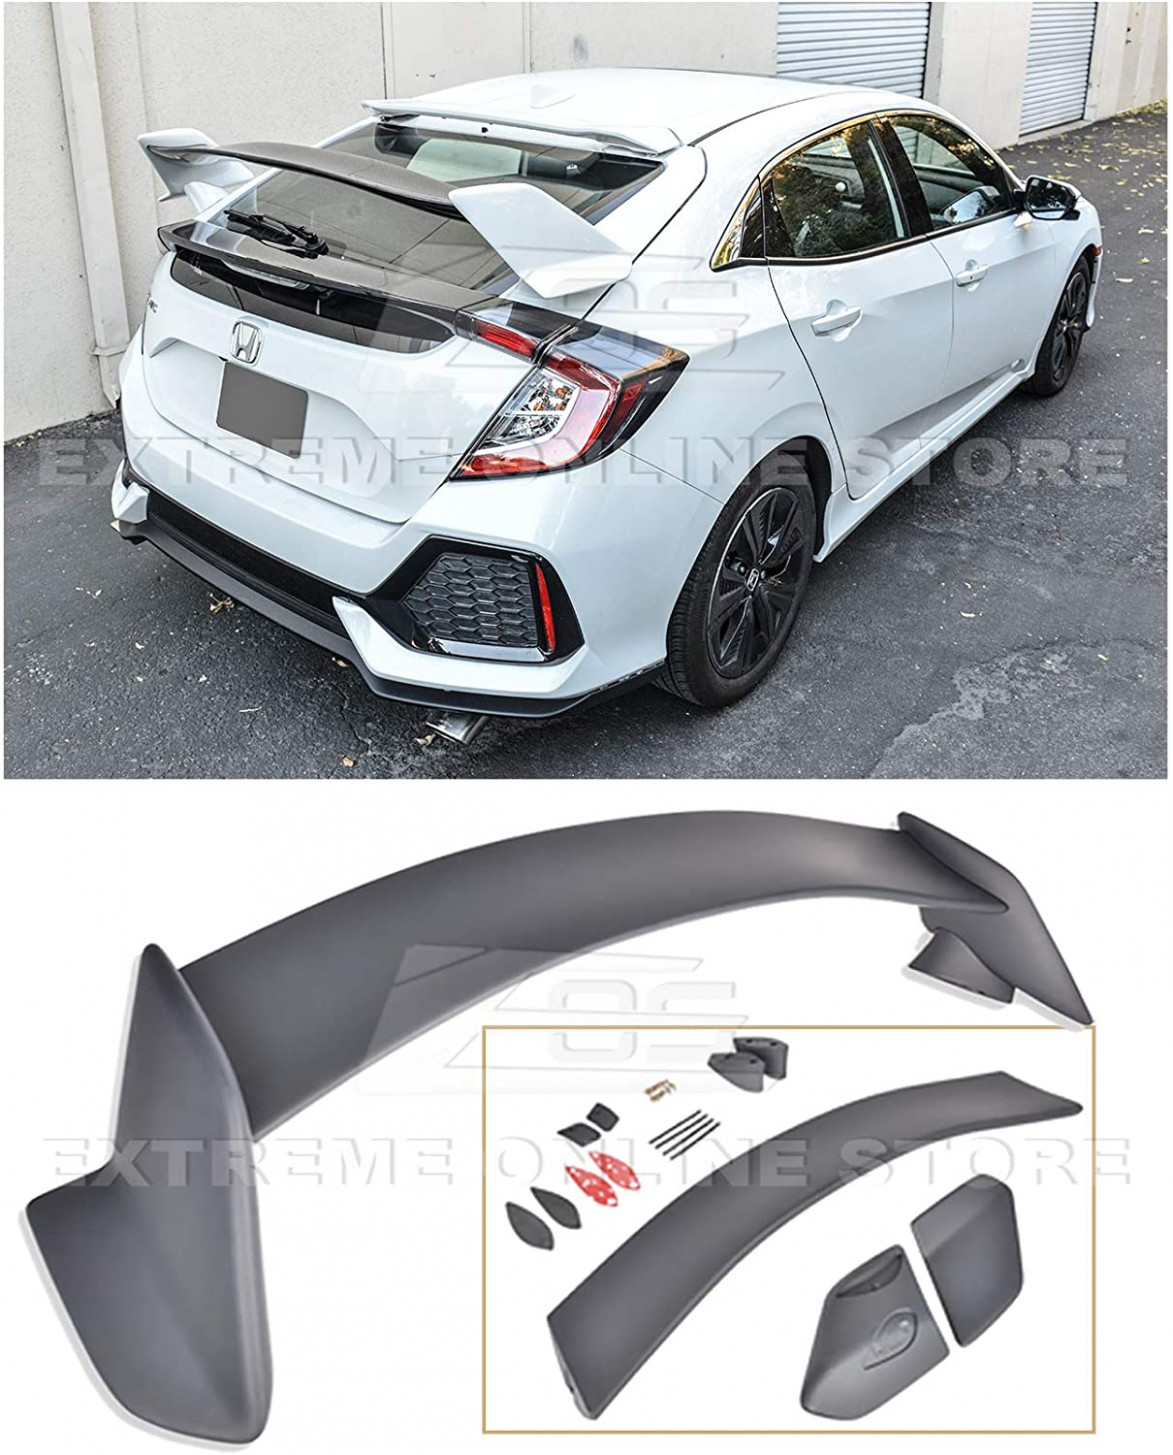 Replacement for 4-4 Honda Civic Hatchback FK4 FK4  JDM Type-R Style  Rear Trunk Lid Wing Spoiler ( ABS Plastic - Primer Black ) - spoiler for honda civic